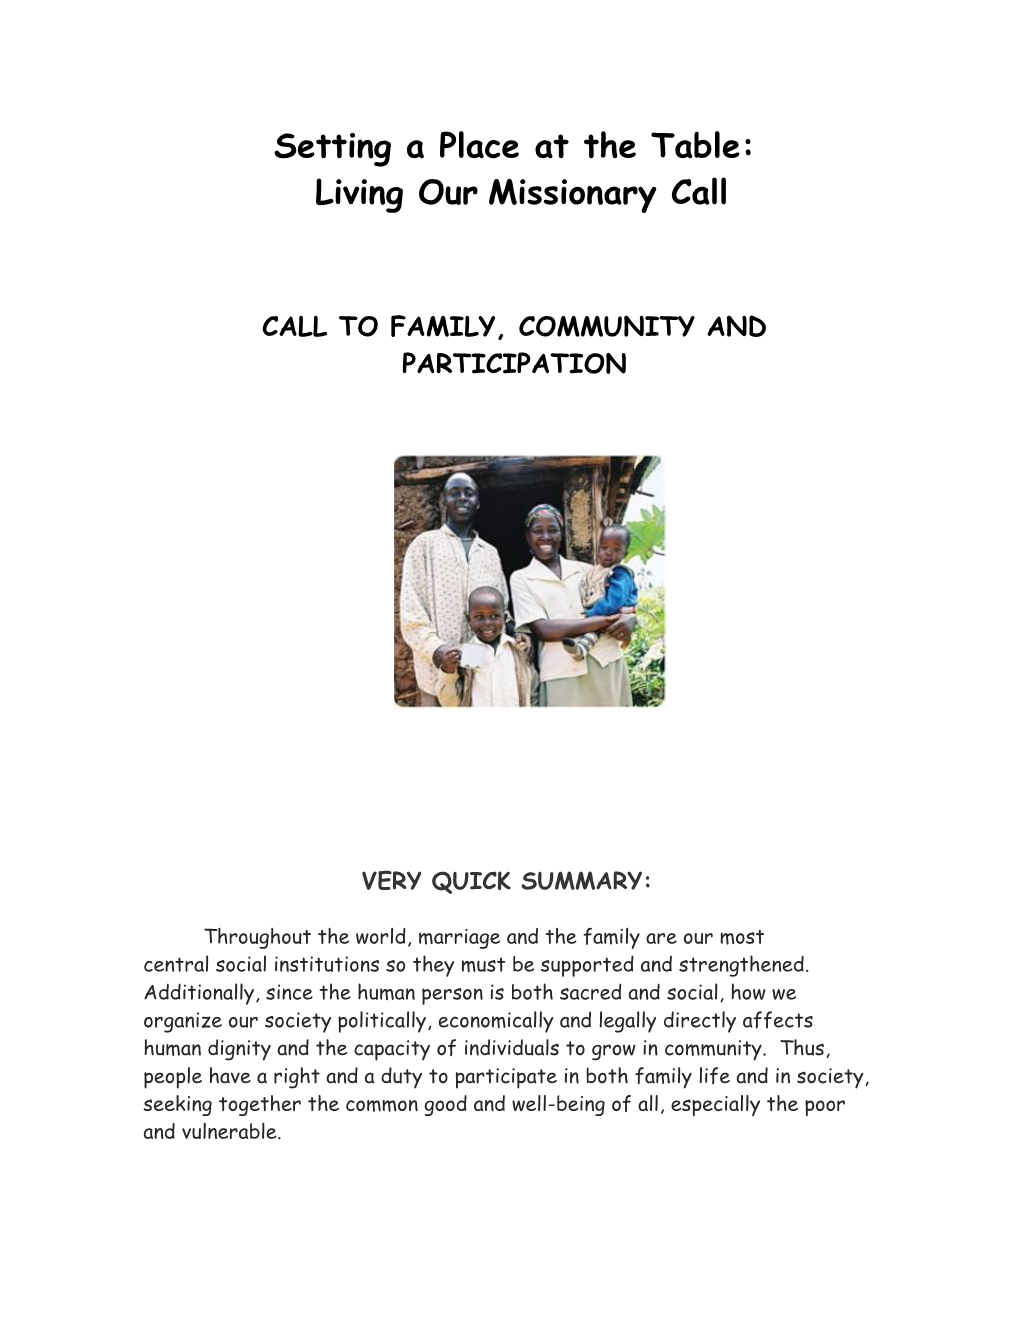 Call to Family, Community, and Participation